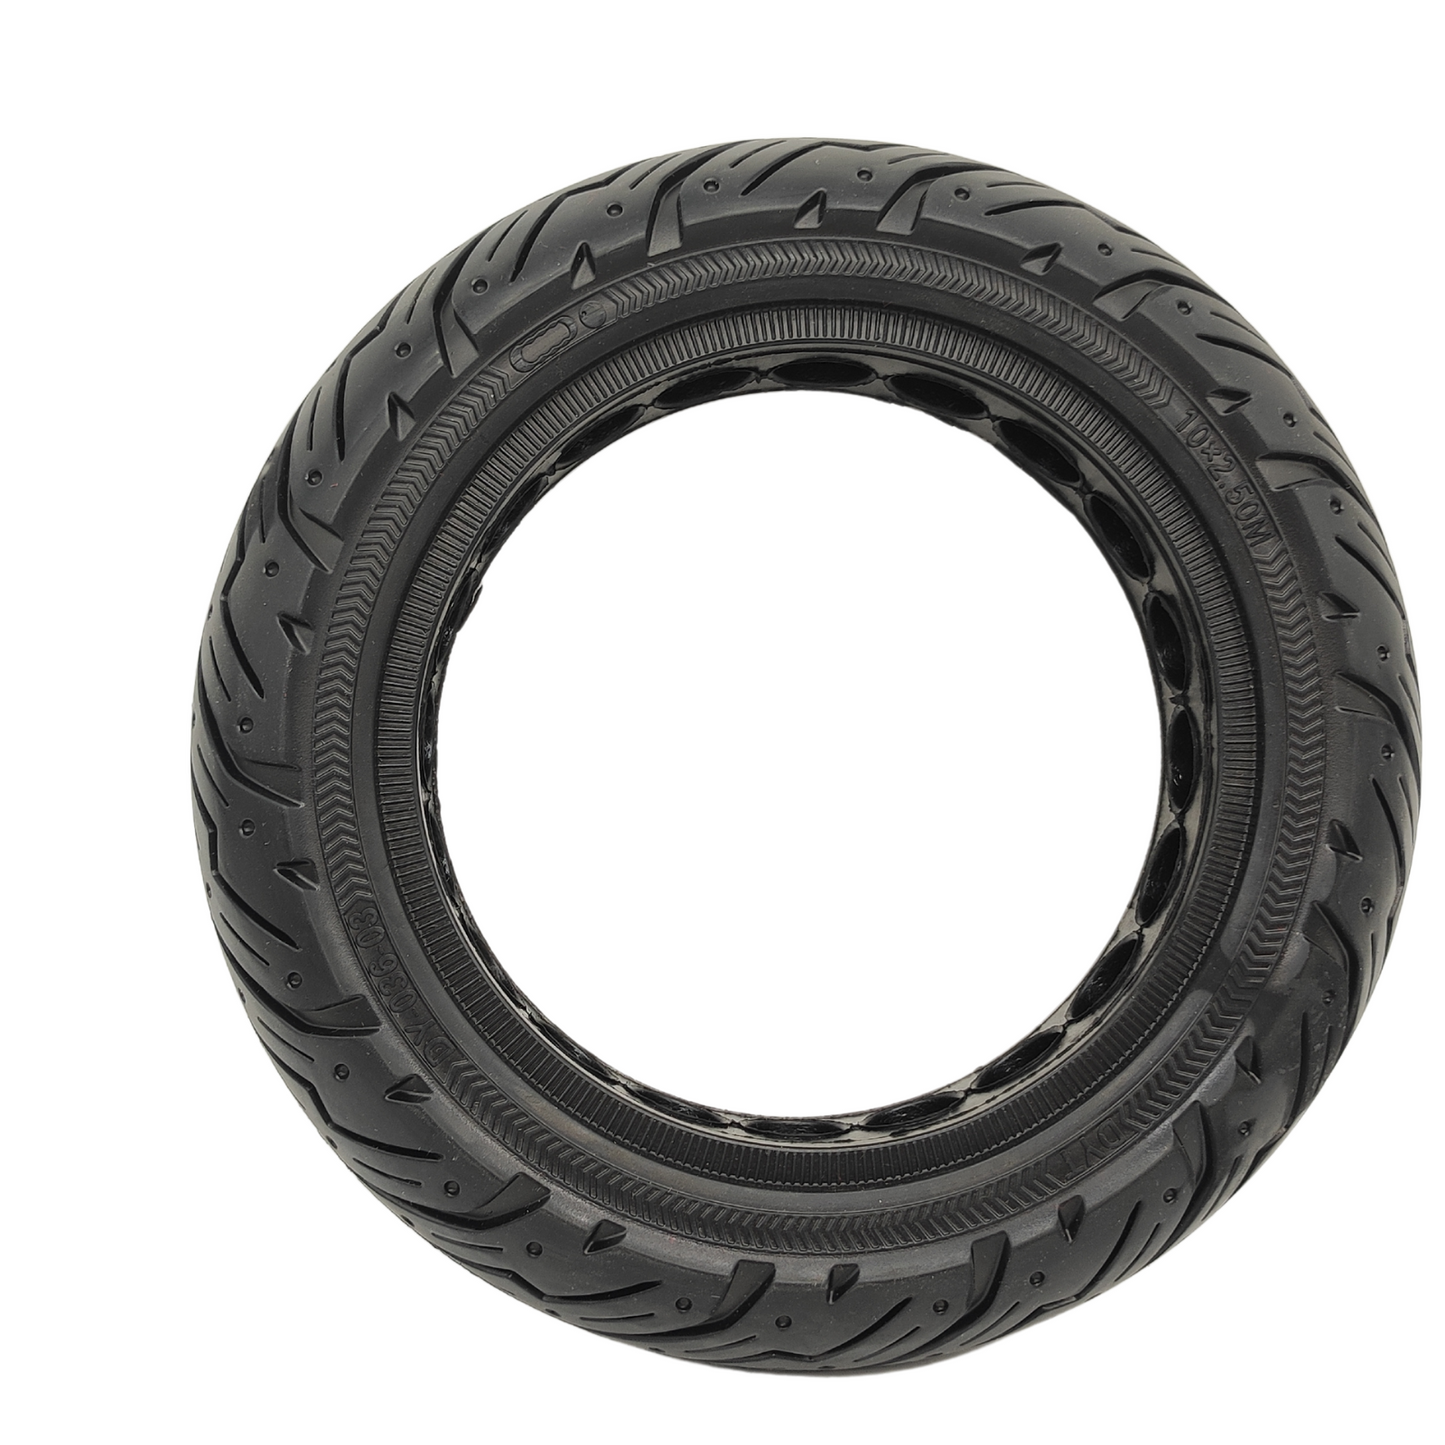 Ninebot Max G30 G30L solid rubber tire 10x2.5 60/70-6.5 44mm for e-scooters